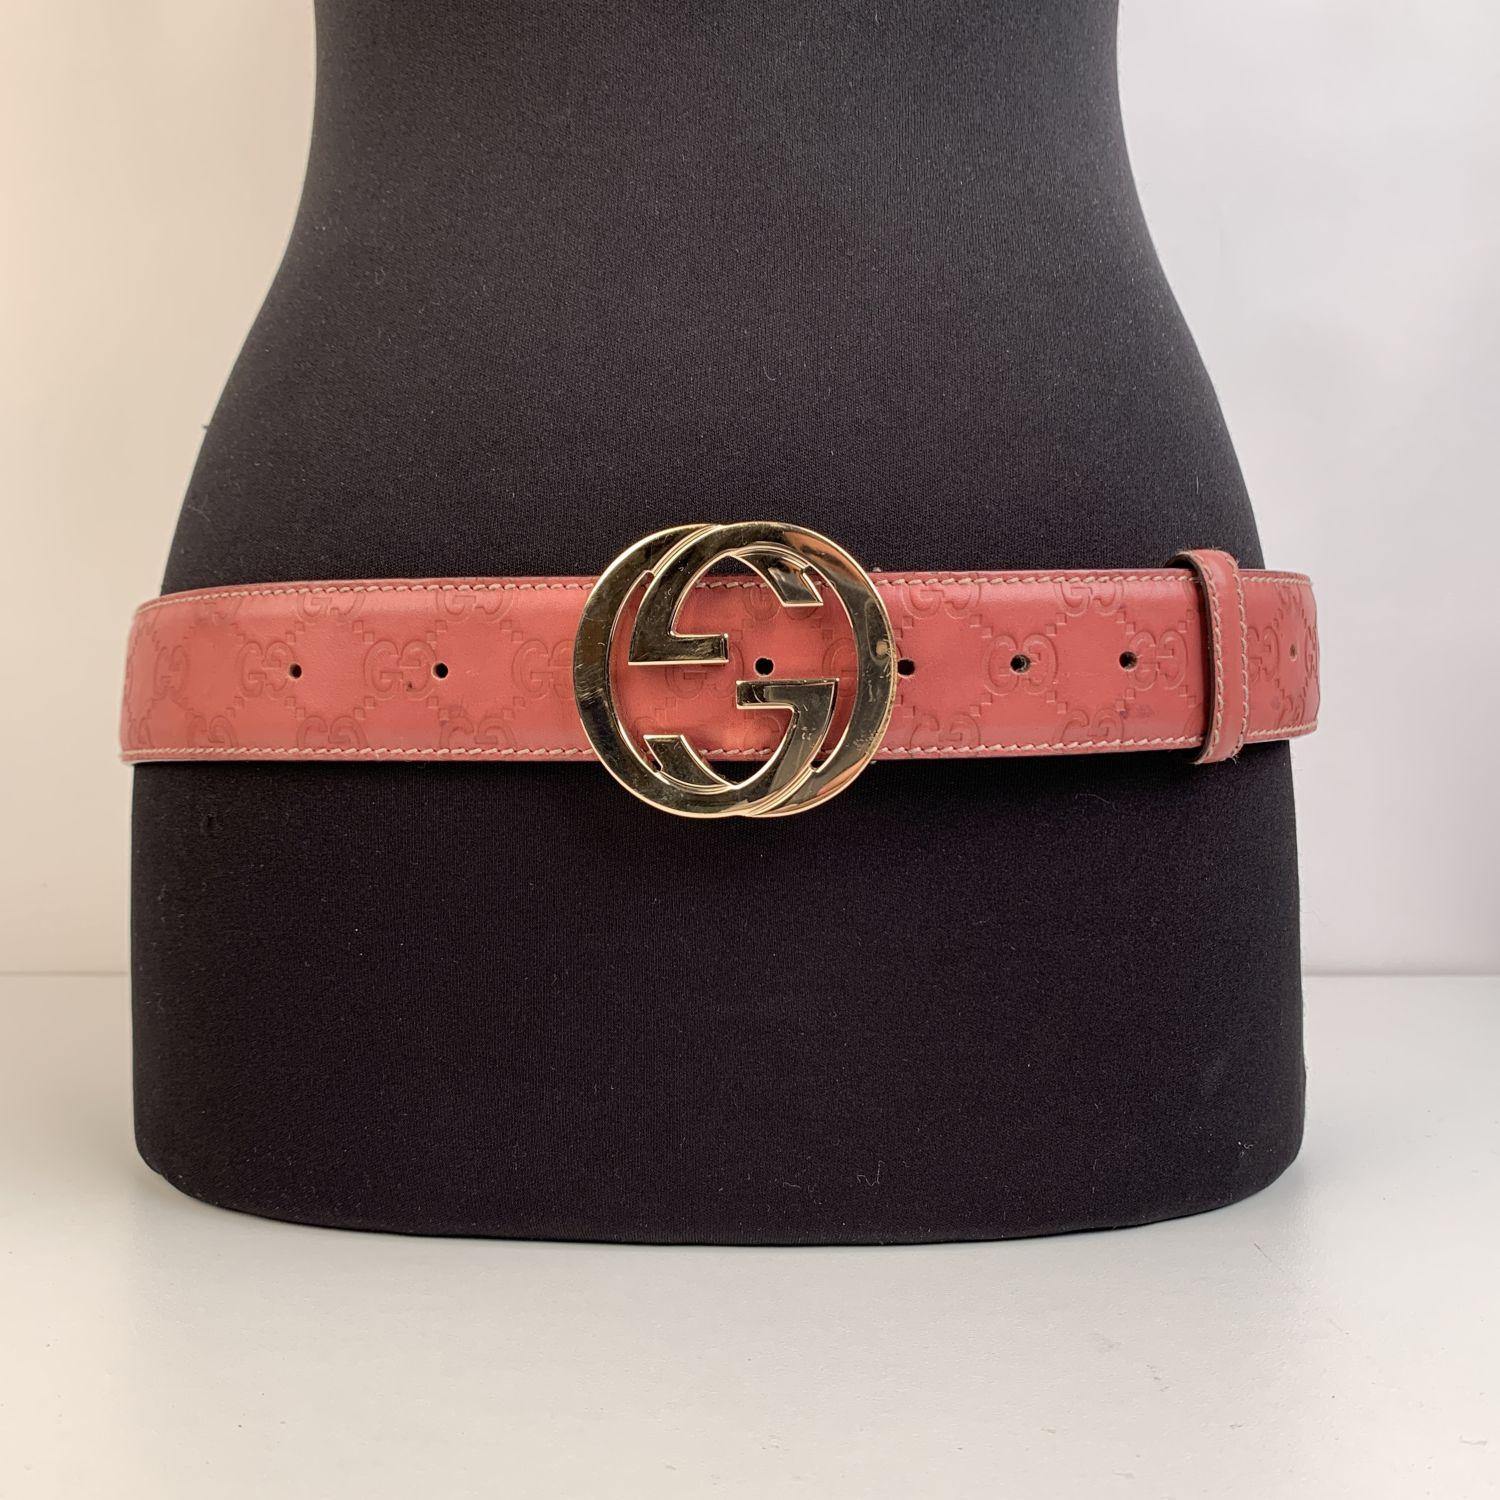 Gucci tan monogram Guccissima leather belt. Gold metal GG buckle. Width: 1.5 inches - 3,8 cm. 'GUCCI - Made in Italy' engraved on the reverse of the belt, serial number engraved on the reverse of the belt. Size: 95/38 (it should correspond to a 42